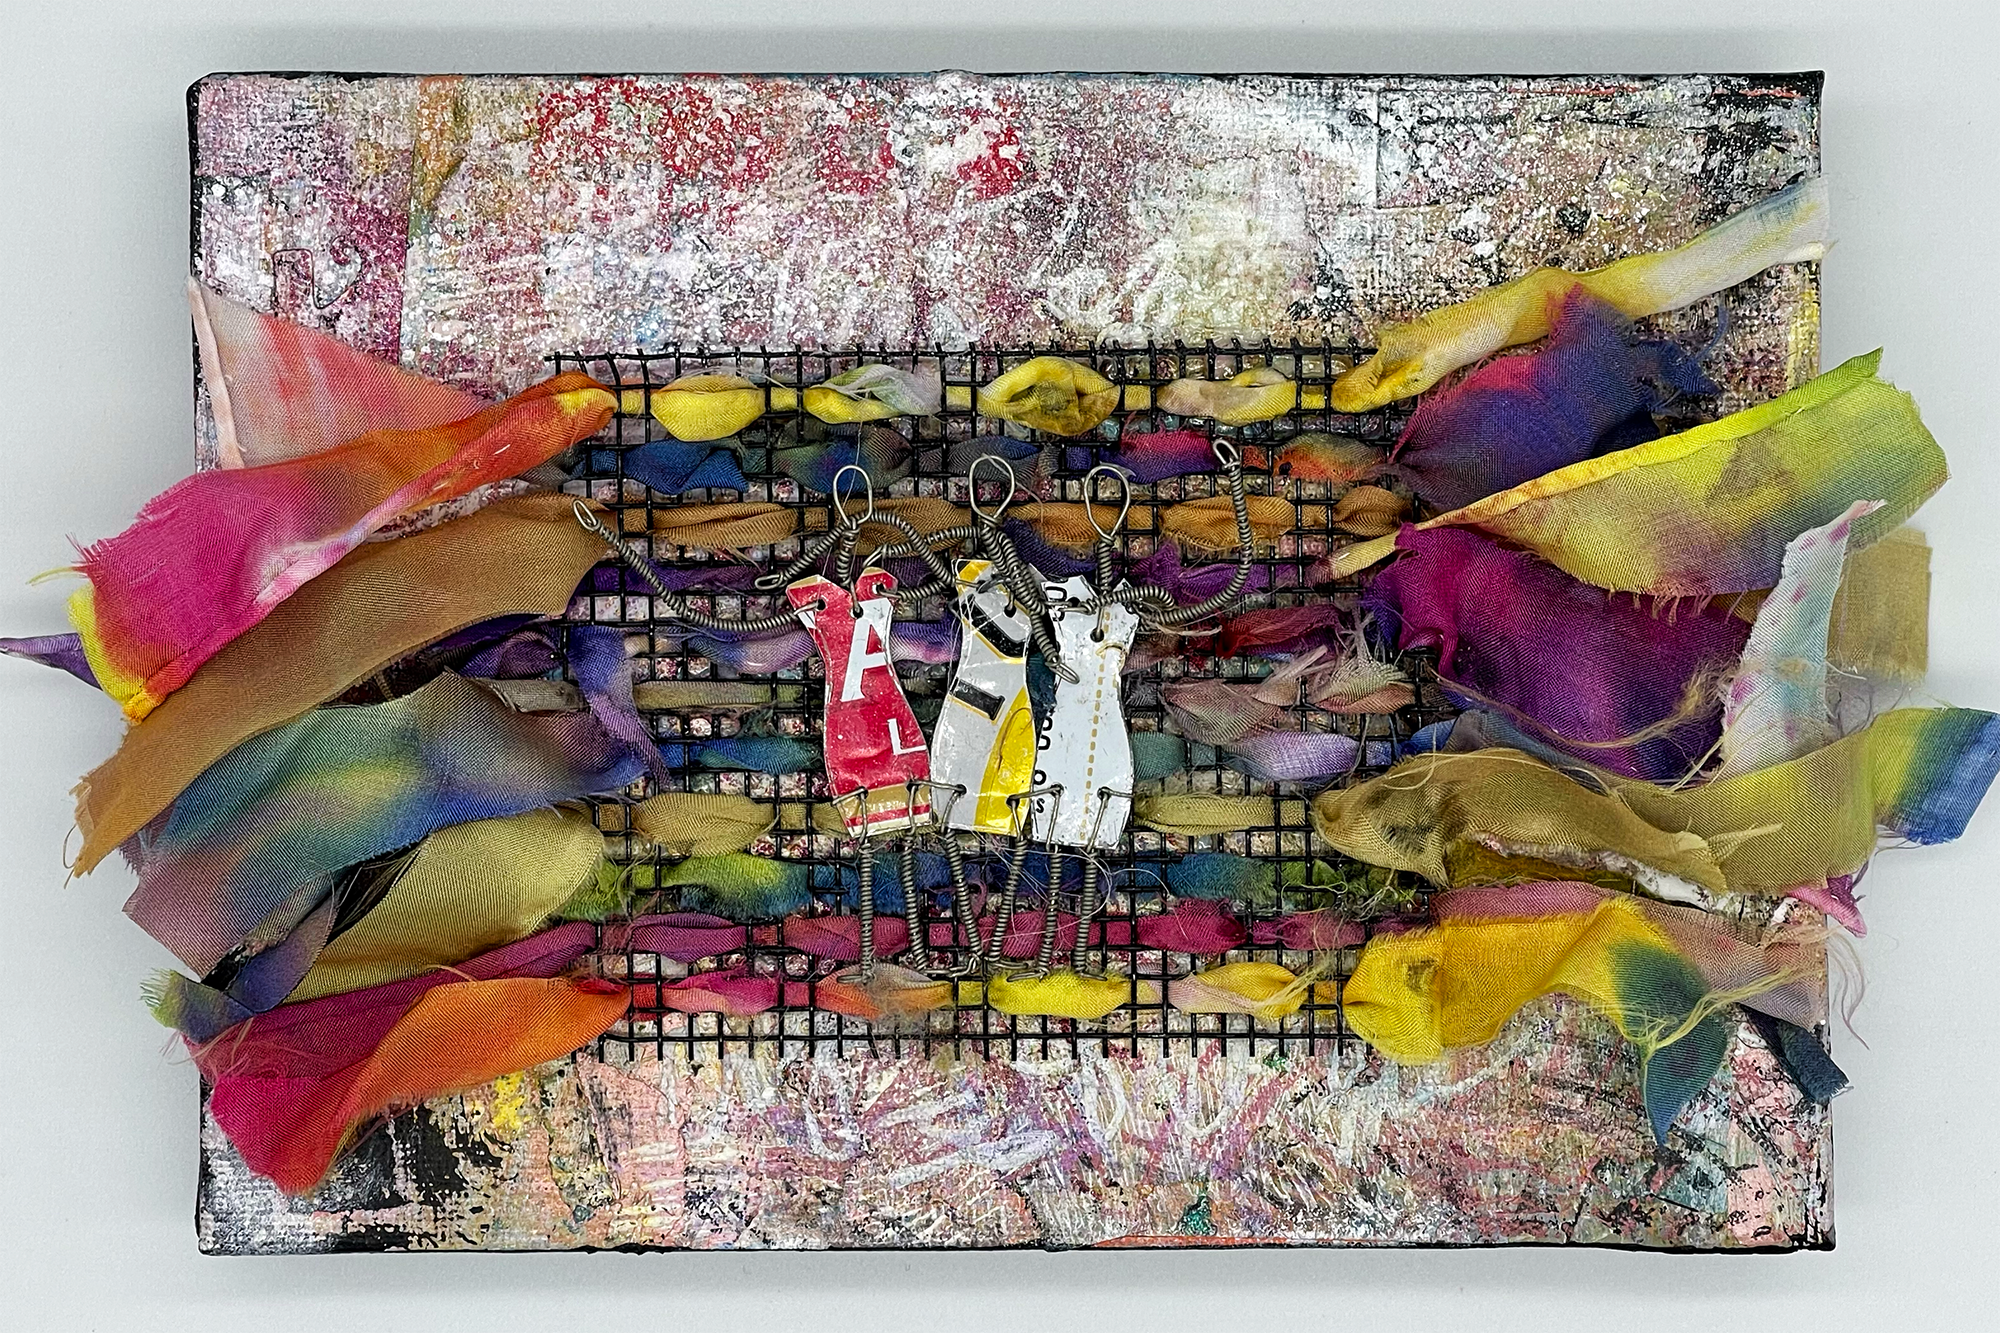 "Three Friends" a mixed media painting by A.H. Lawver. A splattered background, with a 3D wire and textile sculpture on top, showing three ladies made of wire & recycled metal.